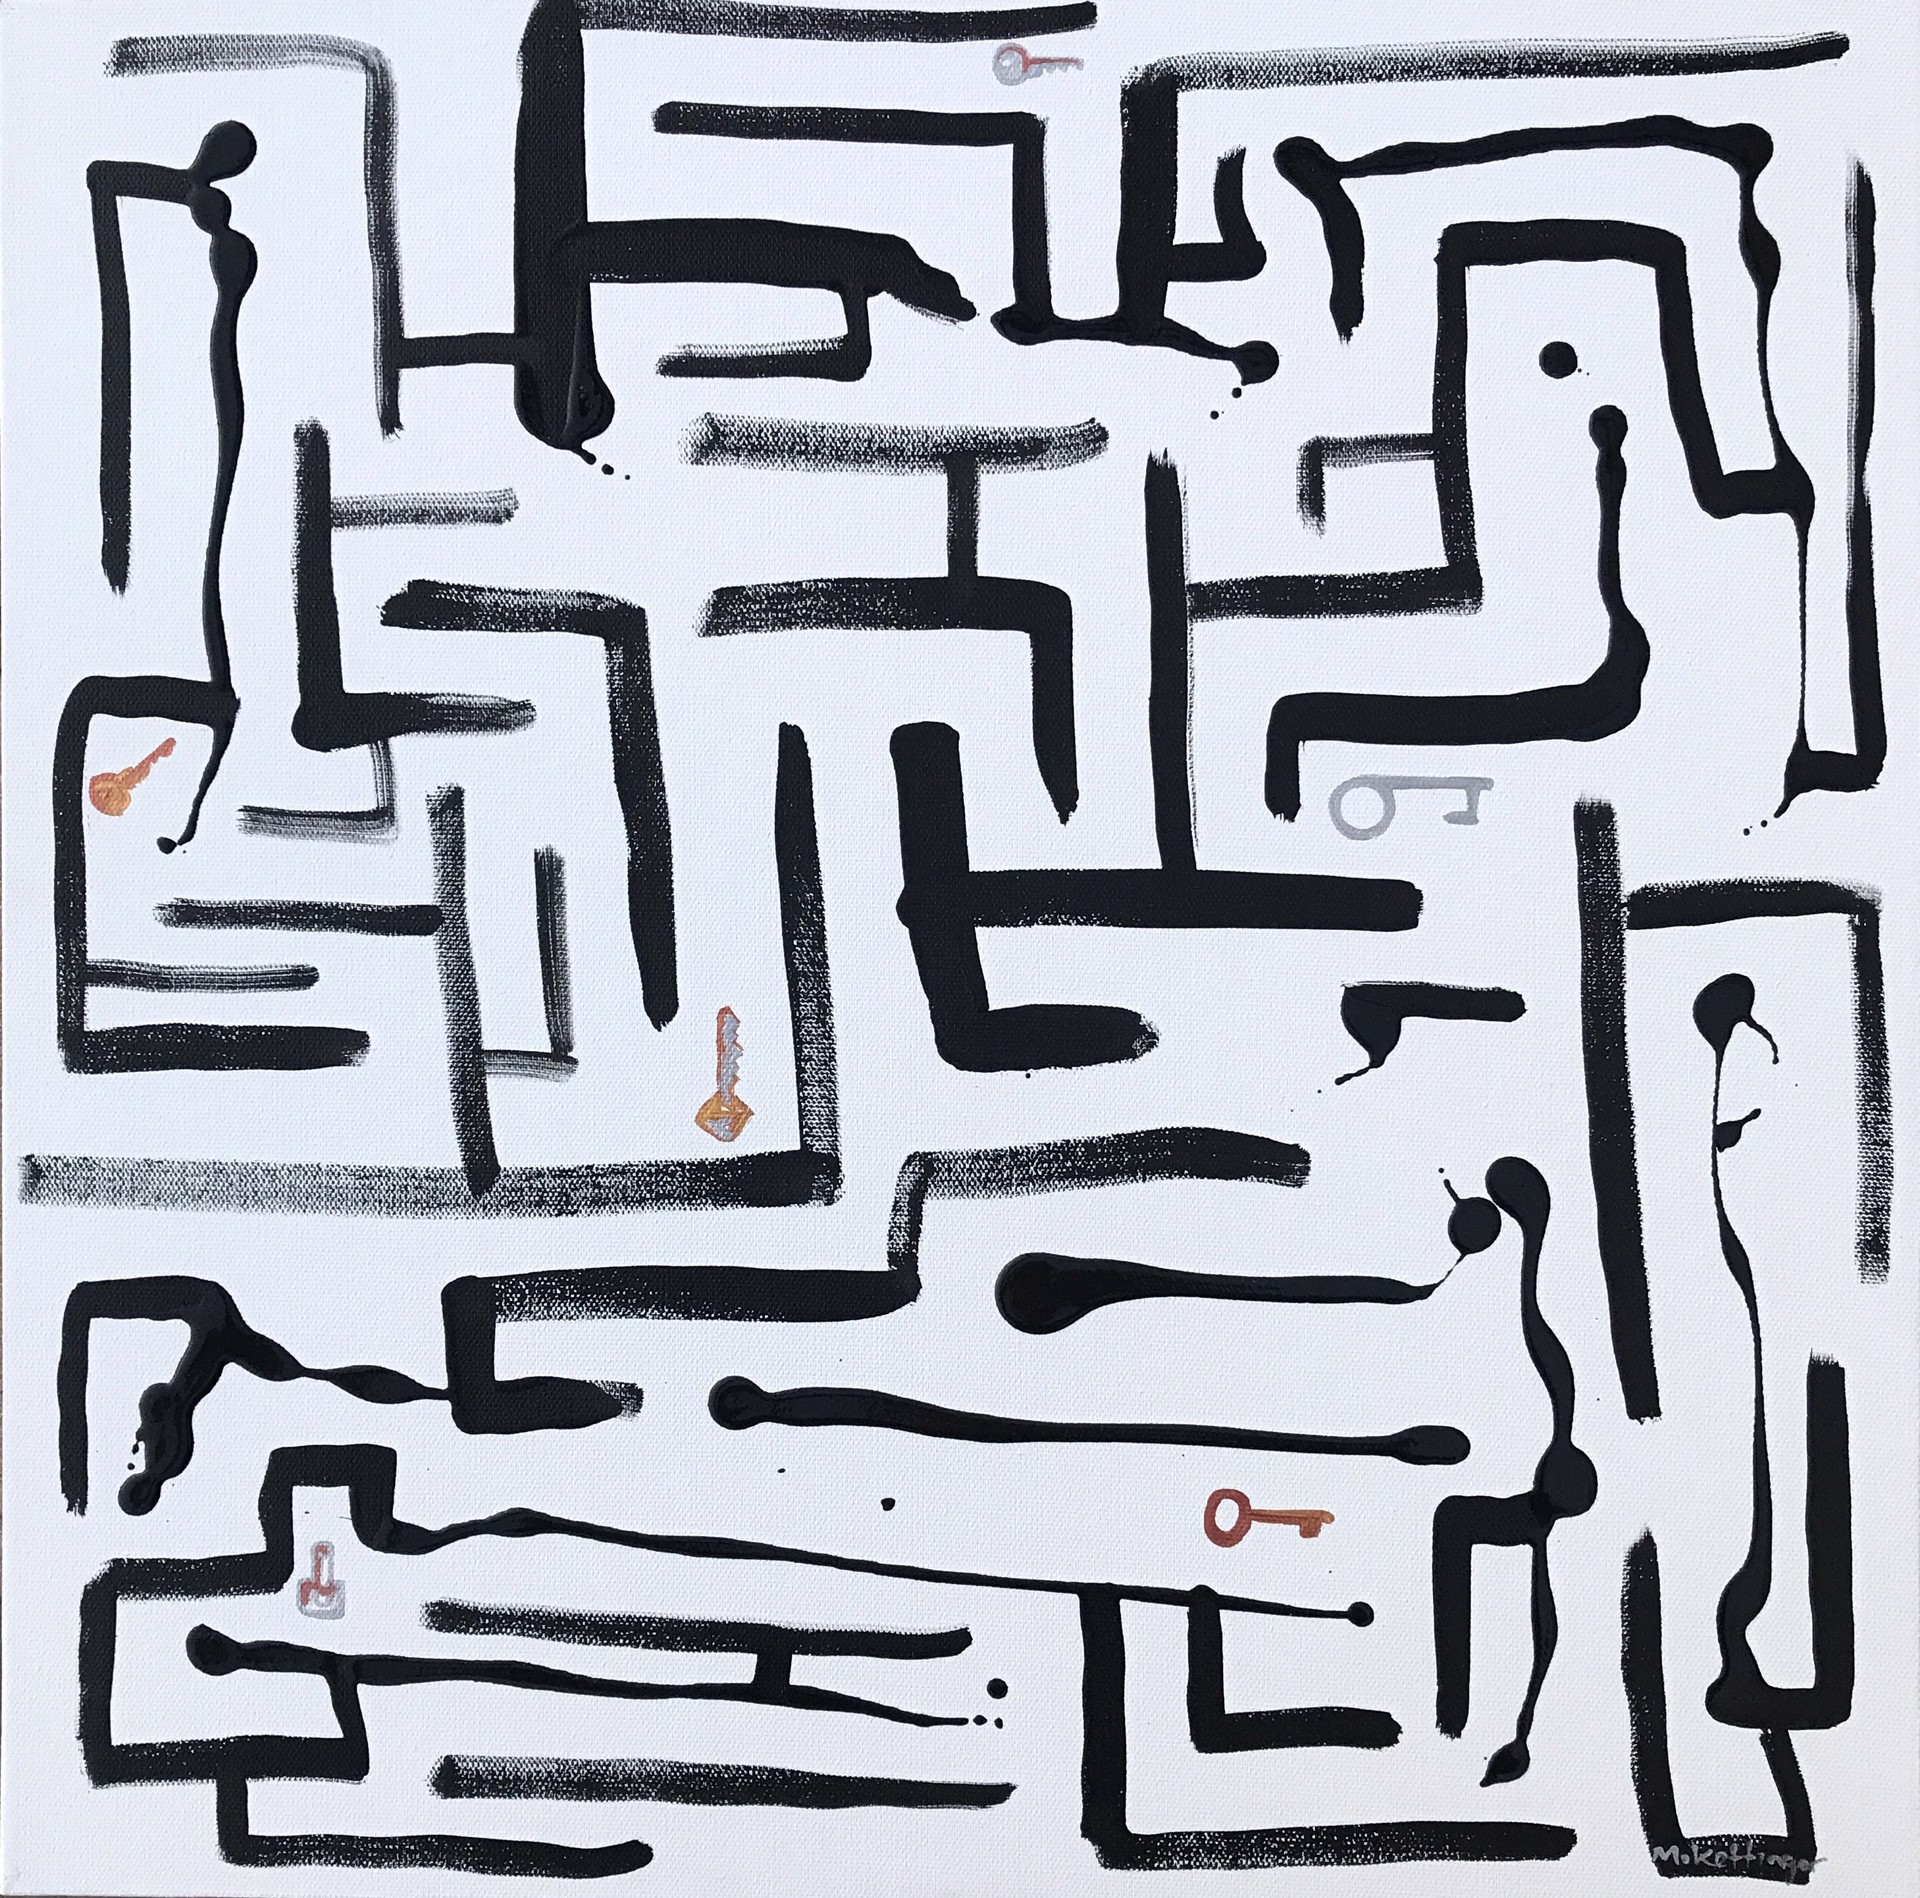 Maze #14 by Mikey Kettinger